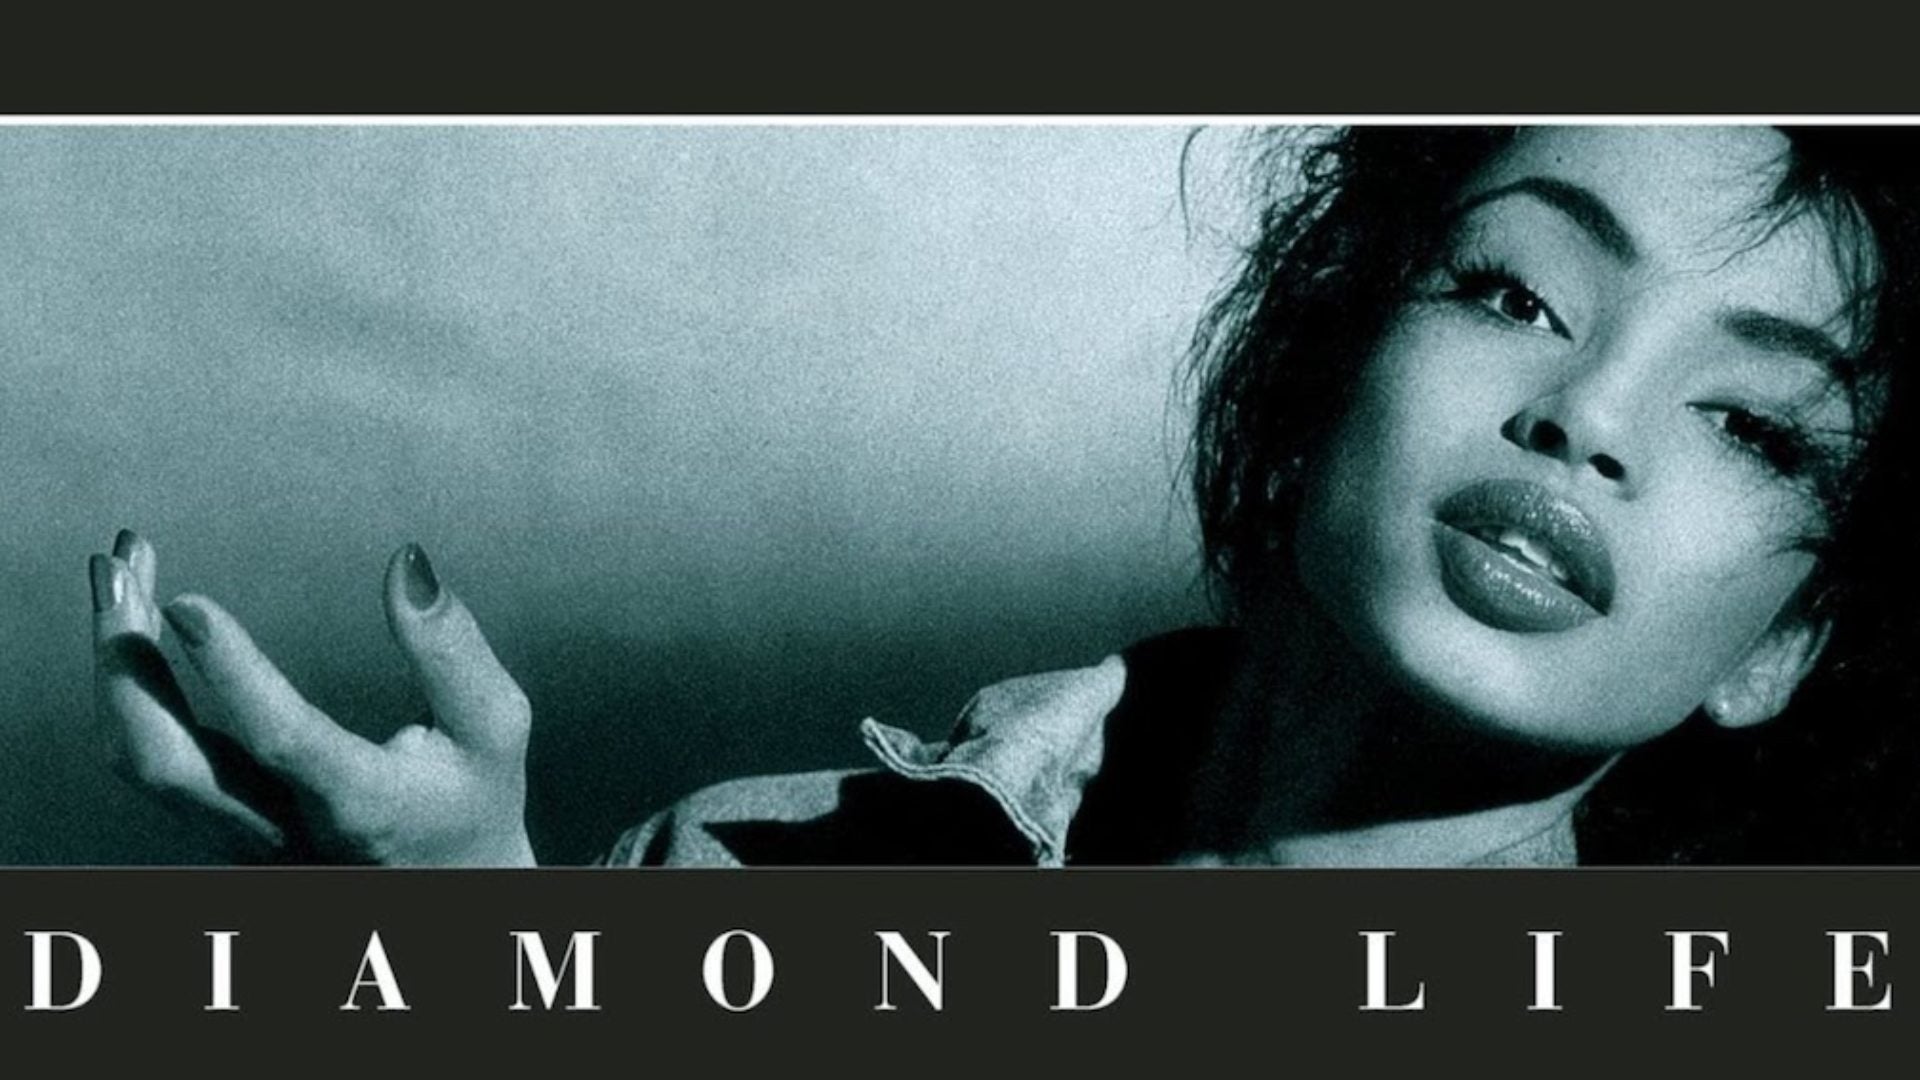 5 Of The Best Songs From Sade's Debut Album 'Diamond Life'